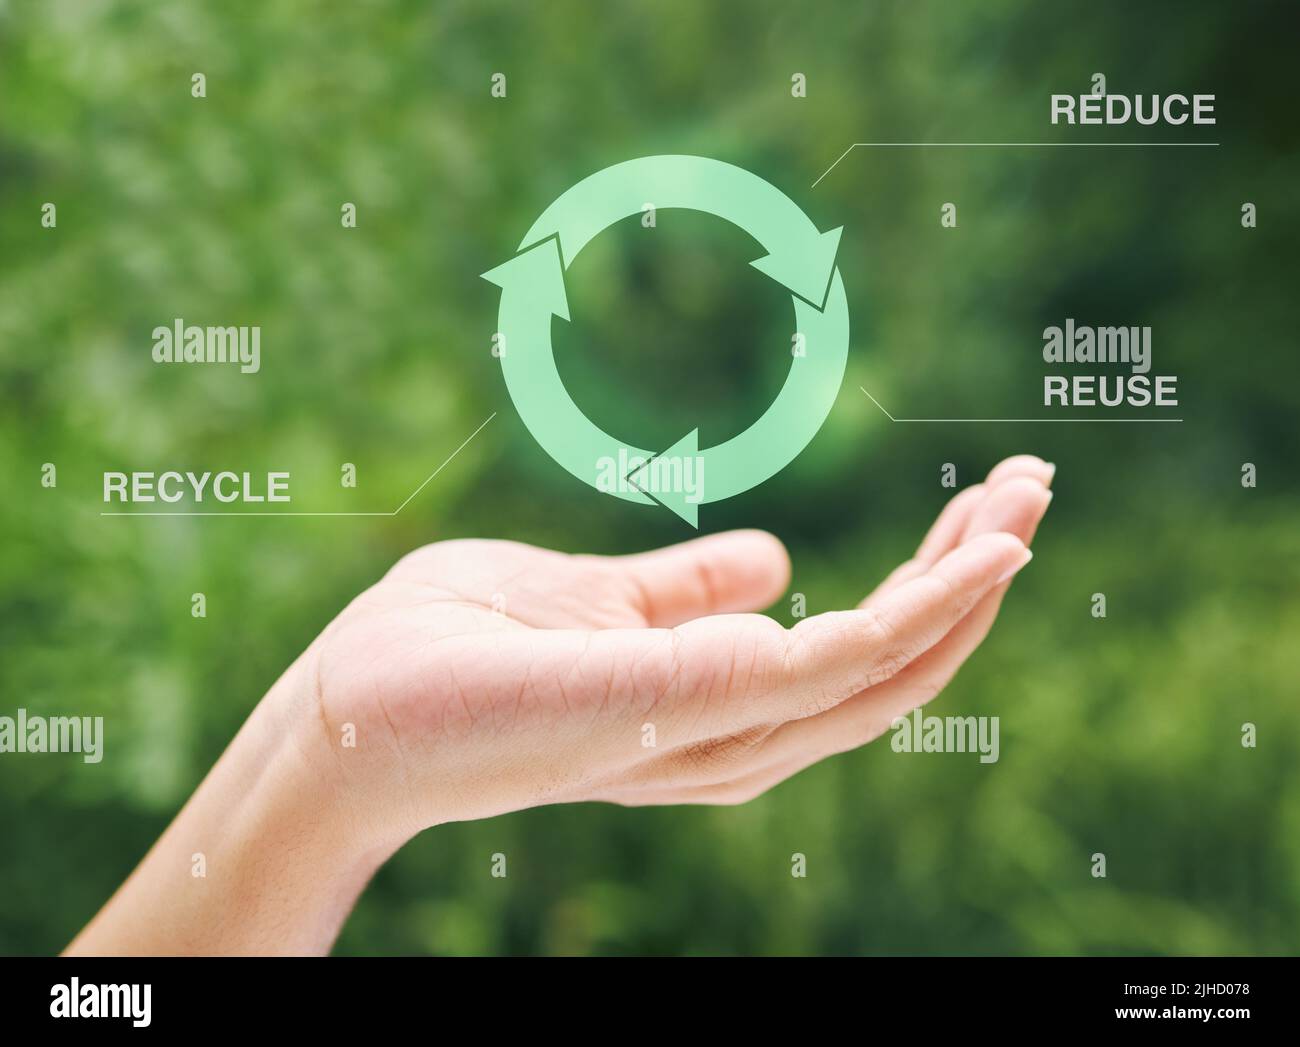 Hand holding a digital recycle symbol. A digital recycling symbol hovering over a hand. Using technology to recycle, reuse and reduce waste. Stock Photo